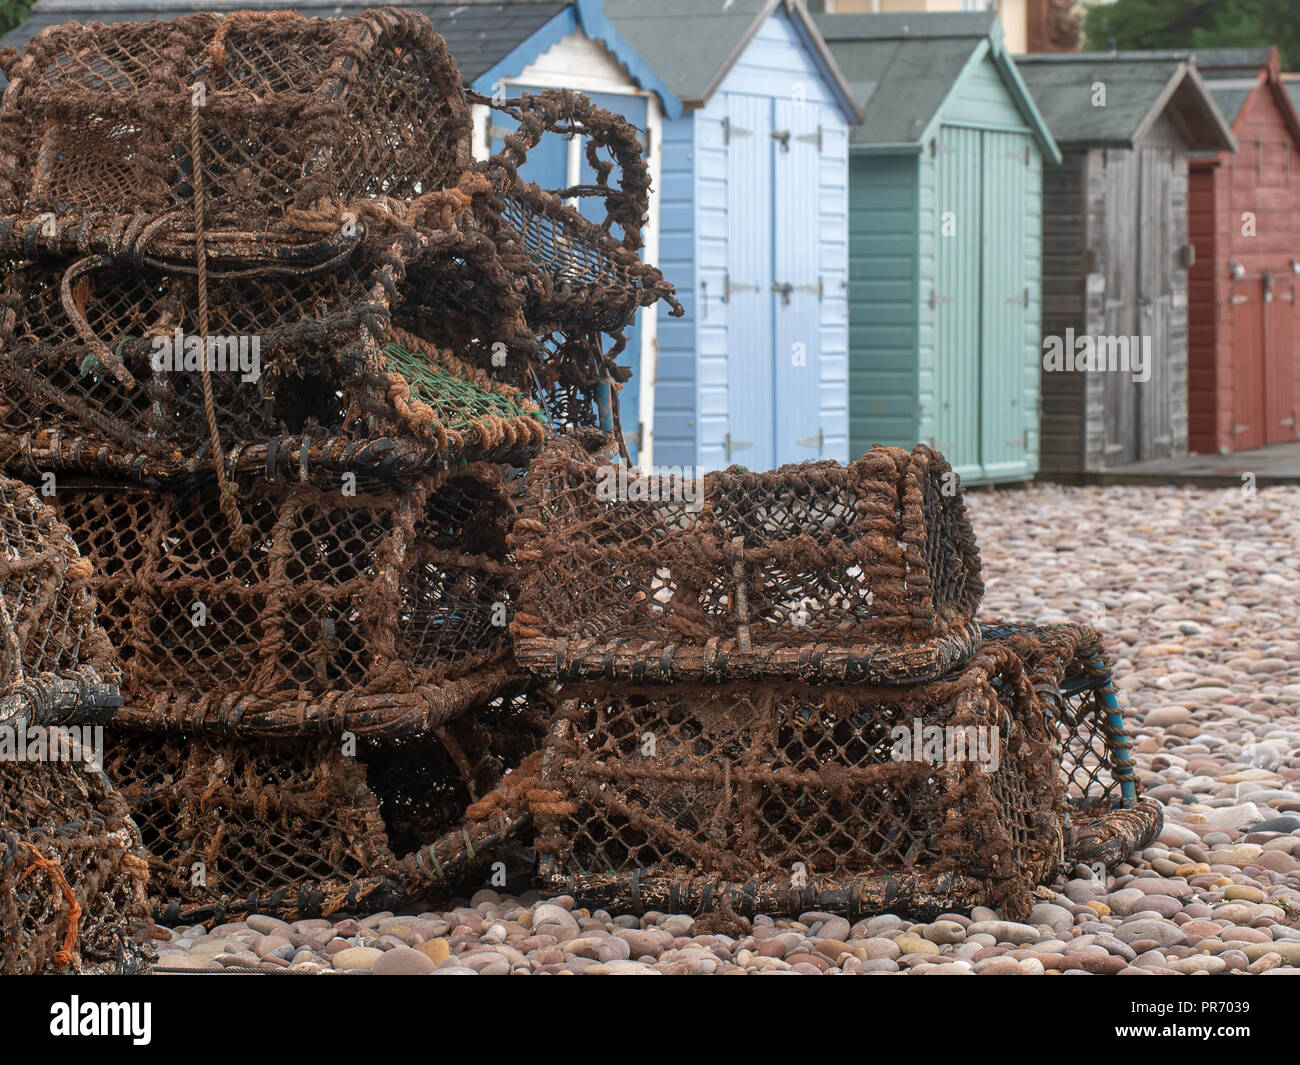 Crab creels and beach huts on the beach at Budleigh Salterton, East Devon, UK. Fishing and tourism, essential industries. Stock Photo